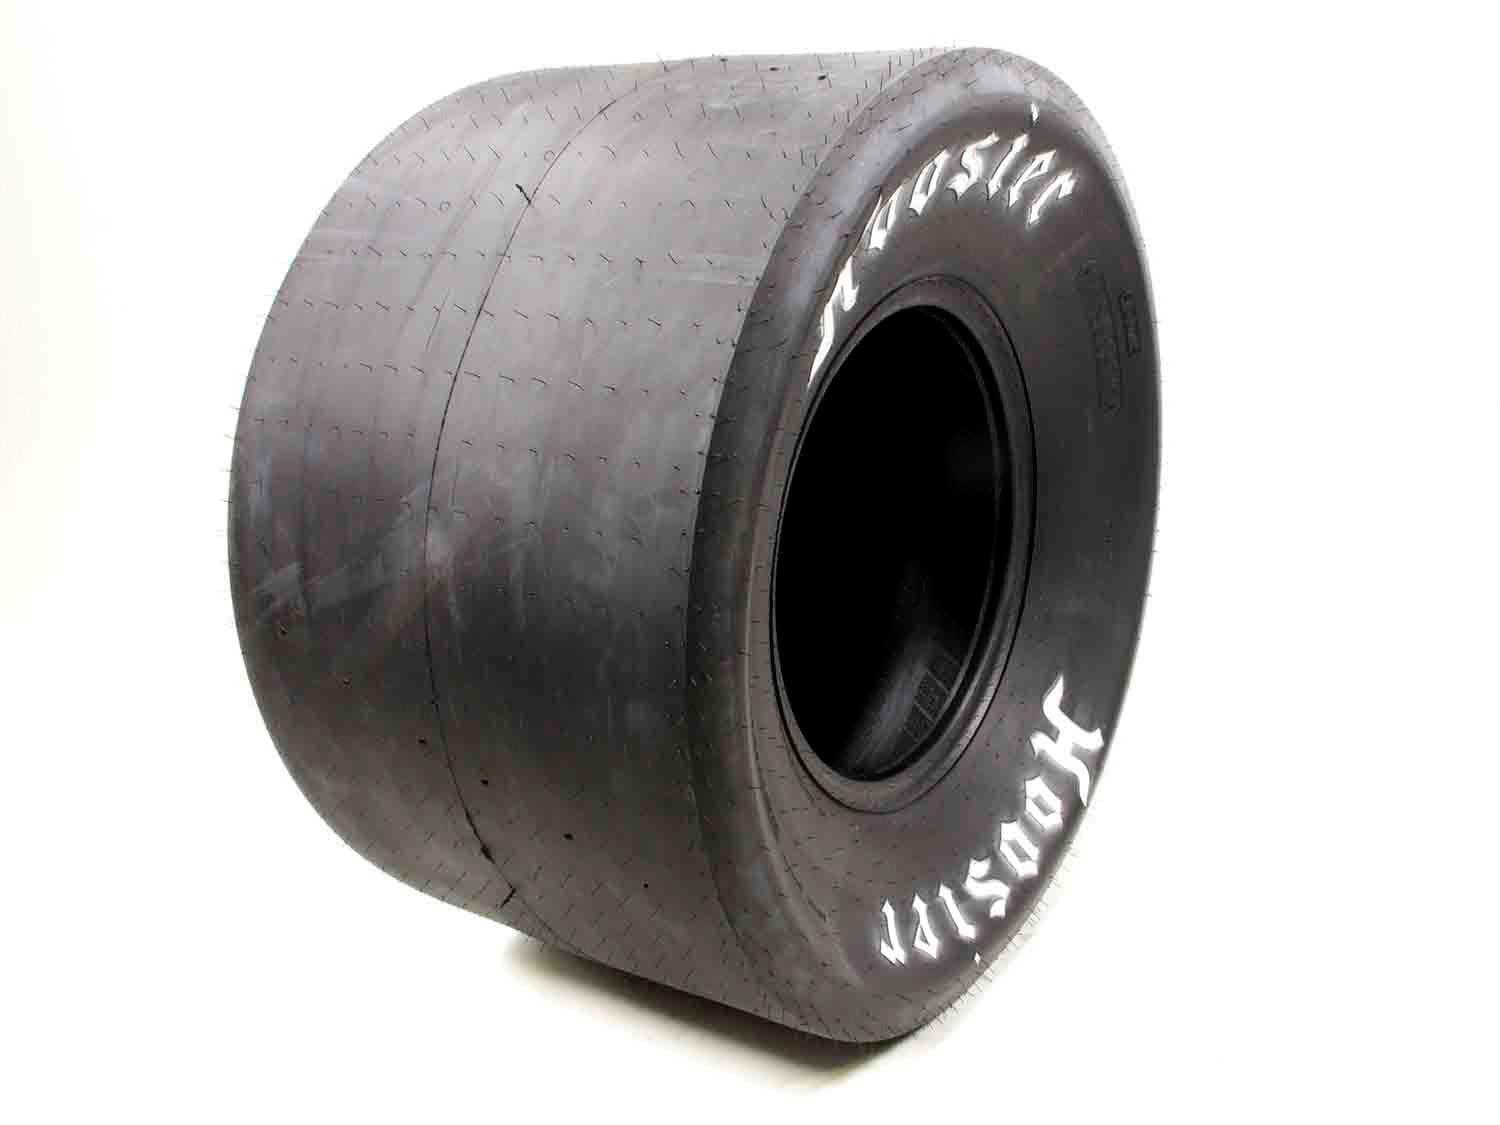 33.0/16.5-15S Drag Tire - Soft Sidewall - Burlile Performance Products